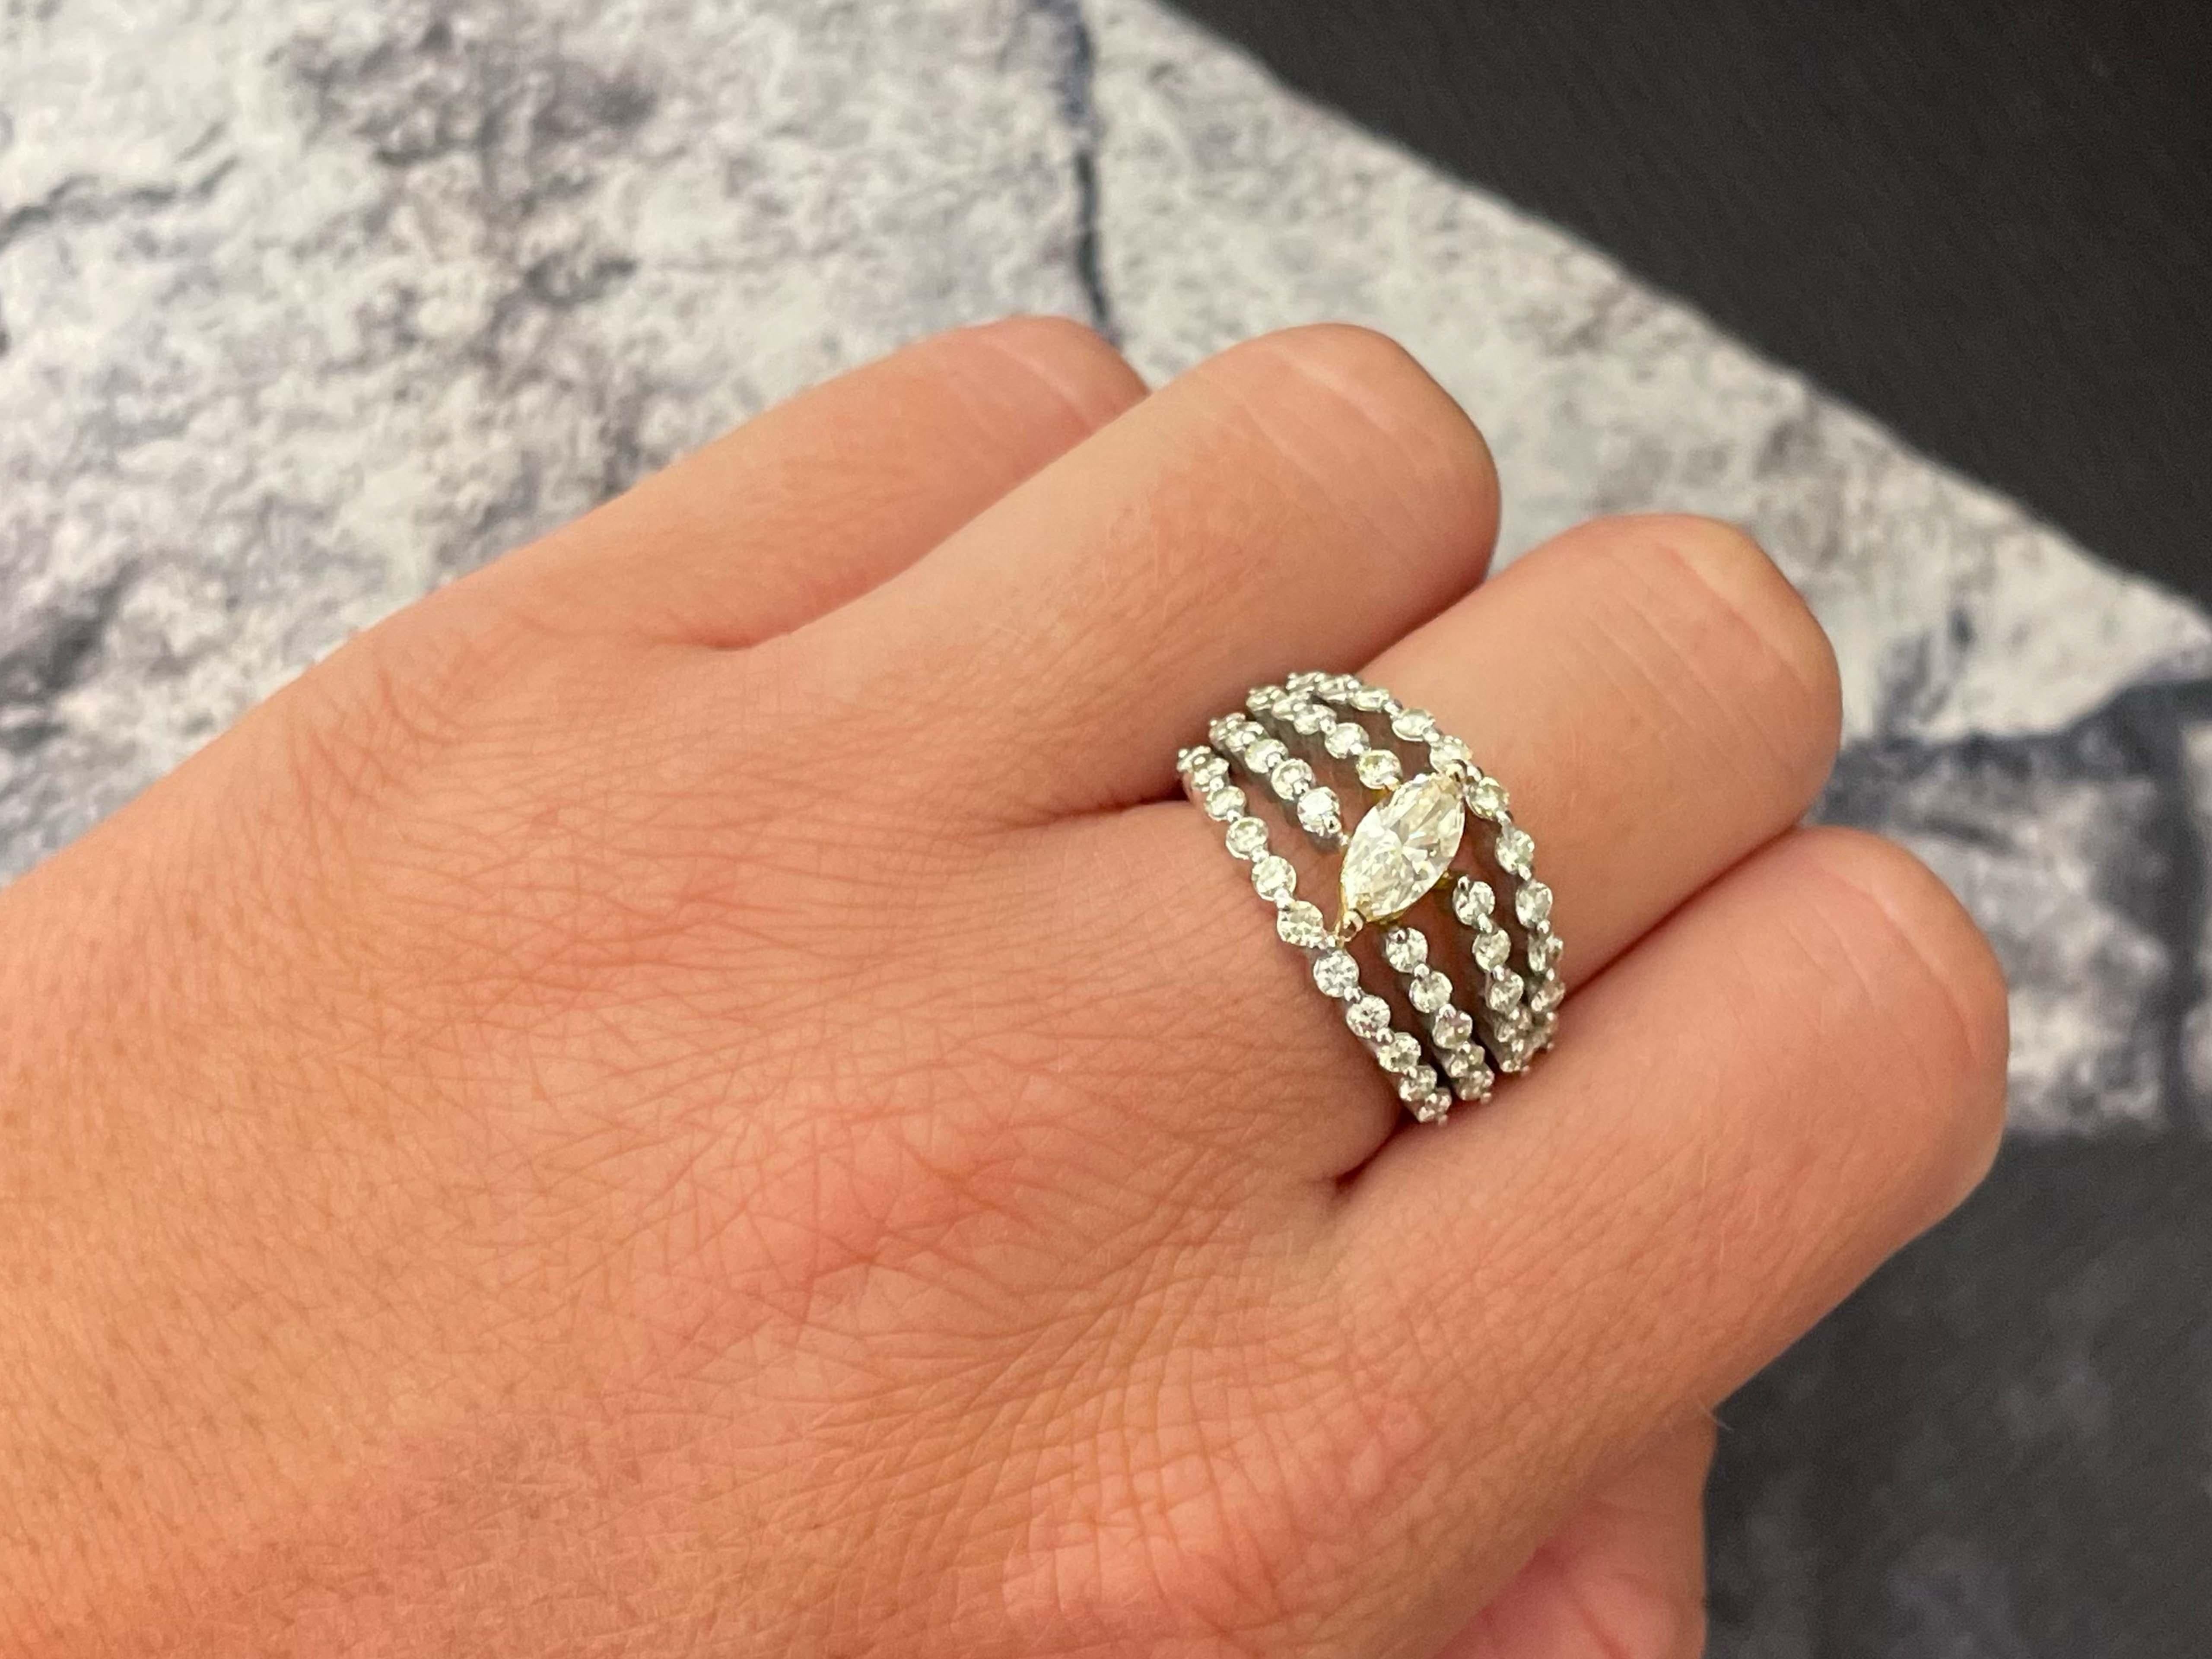 Item Specifications:

Metal: 18k White Gold

Style: Statement Ring

Ring Size: 6.5 (resizing available for a fee)

Total Weight: 9.9 Grams

Diamond Count: 43

Diamond Carat Weight: 0.50 (center) + 1.26 additional


Diamond Clarity: VS


Diamond